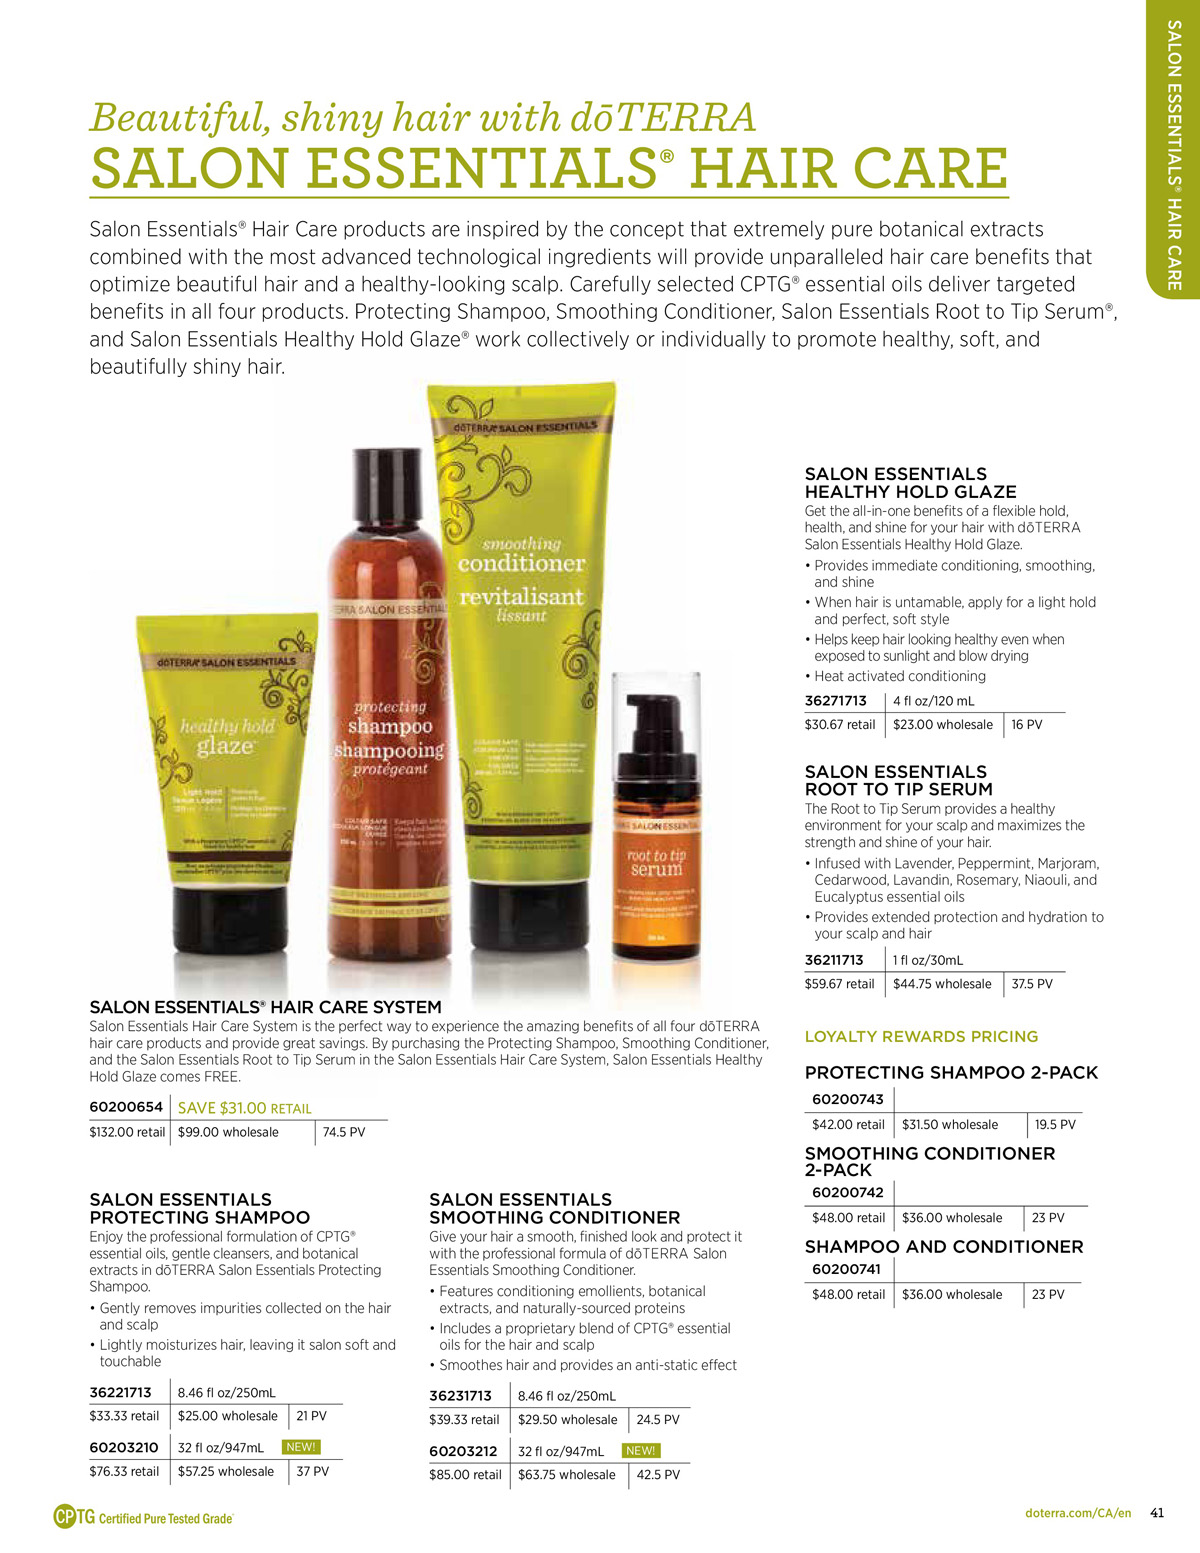 doterra product guide page 41